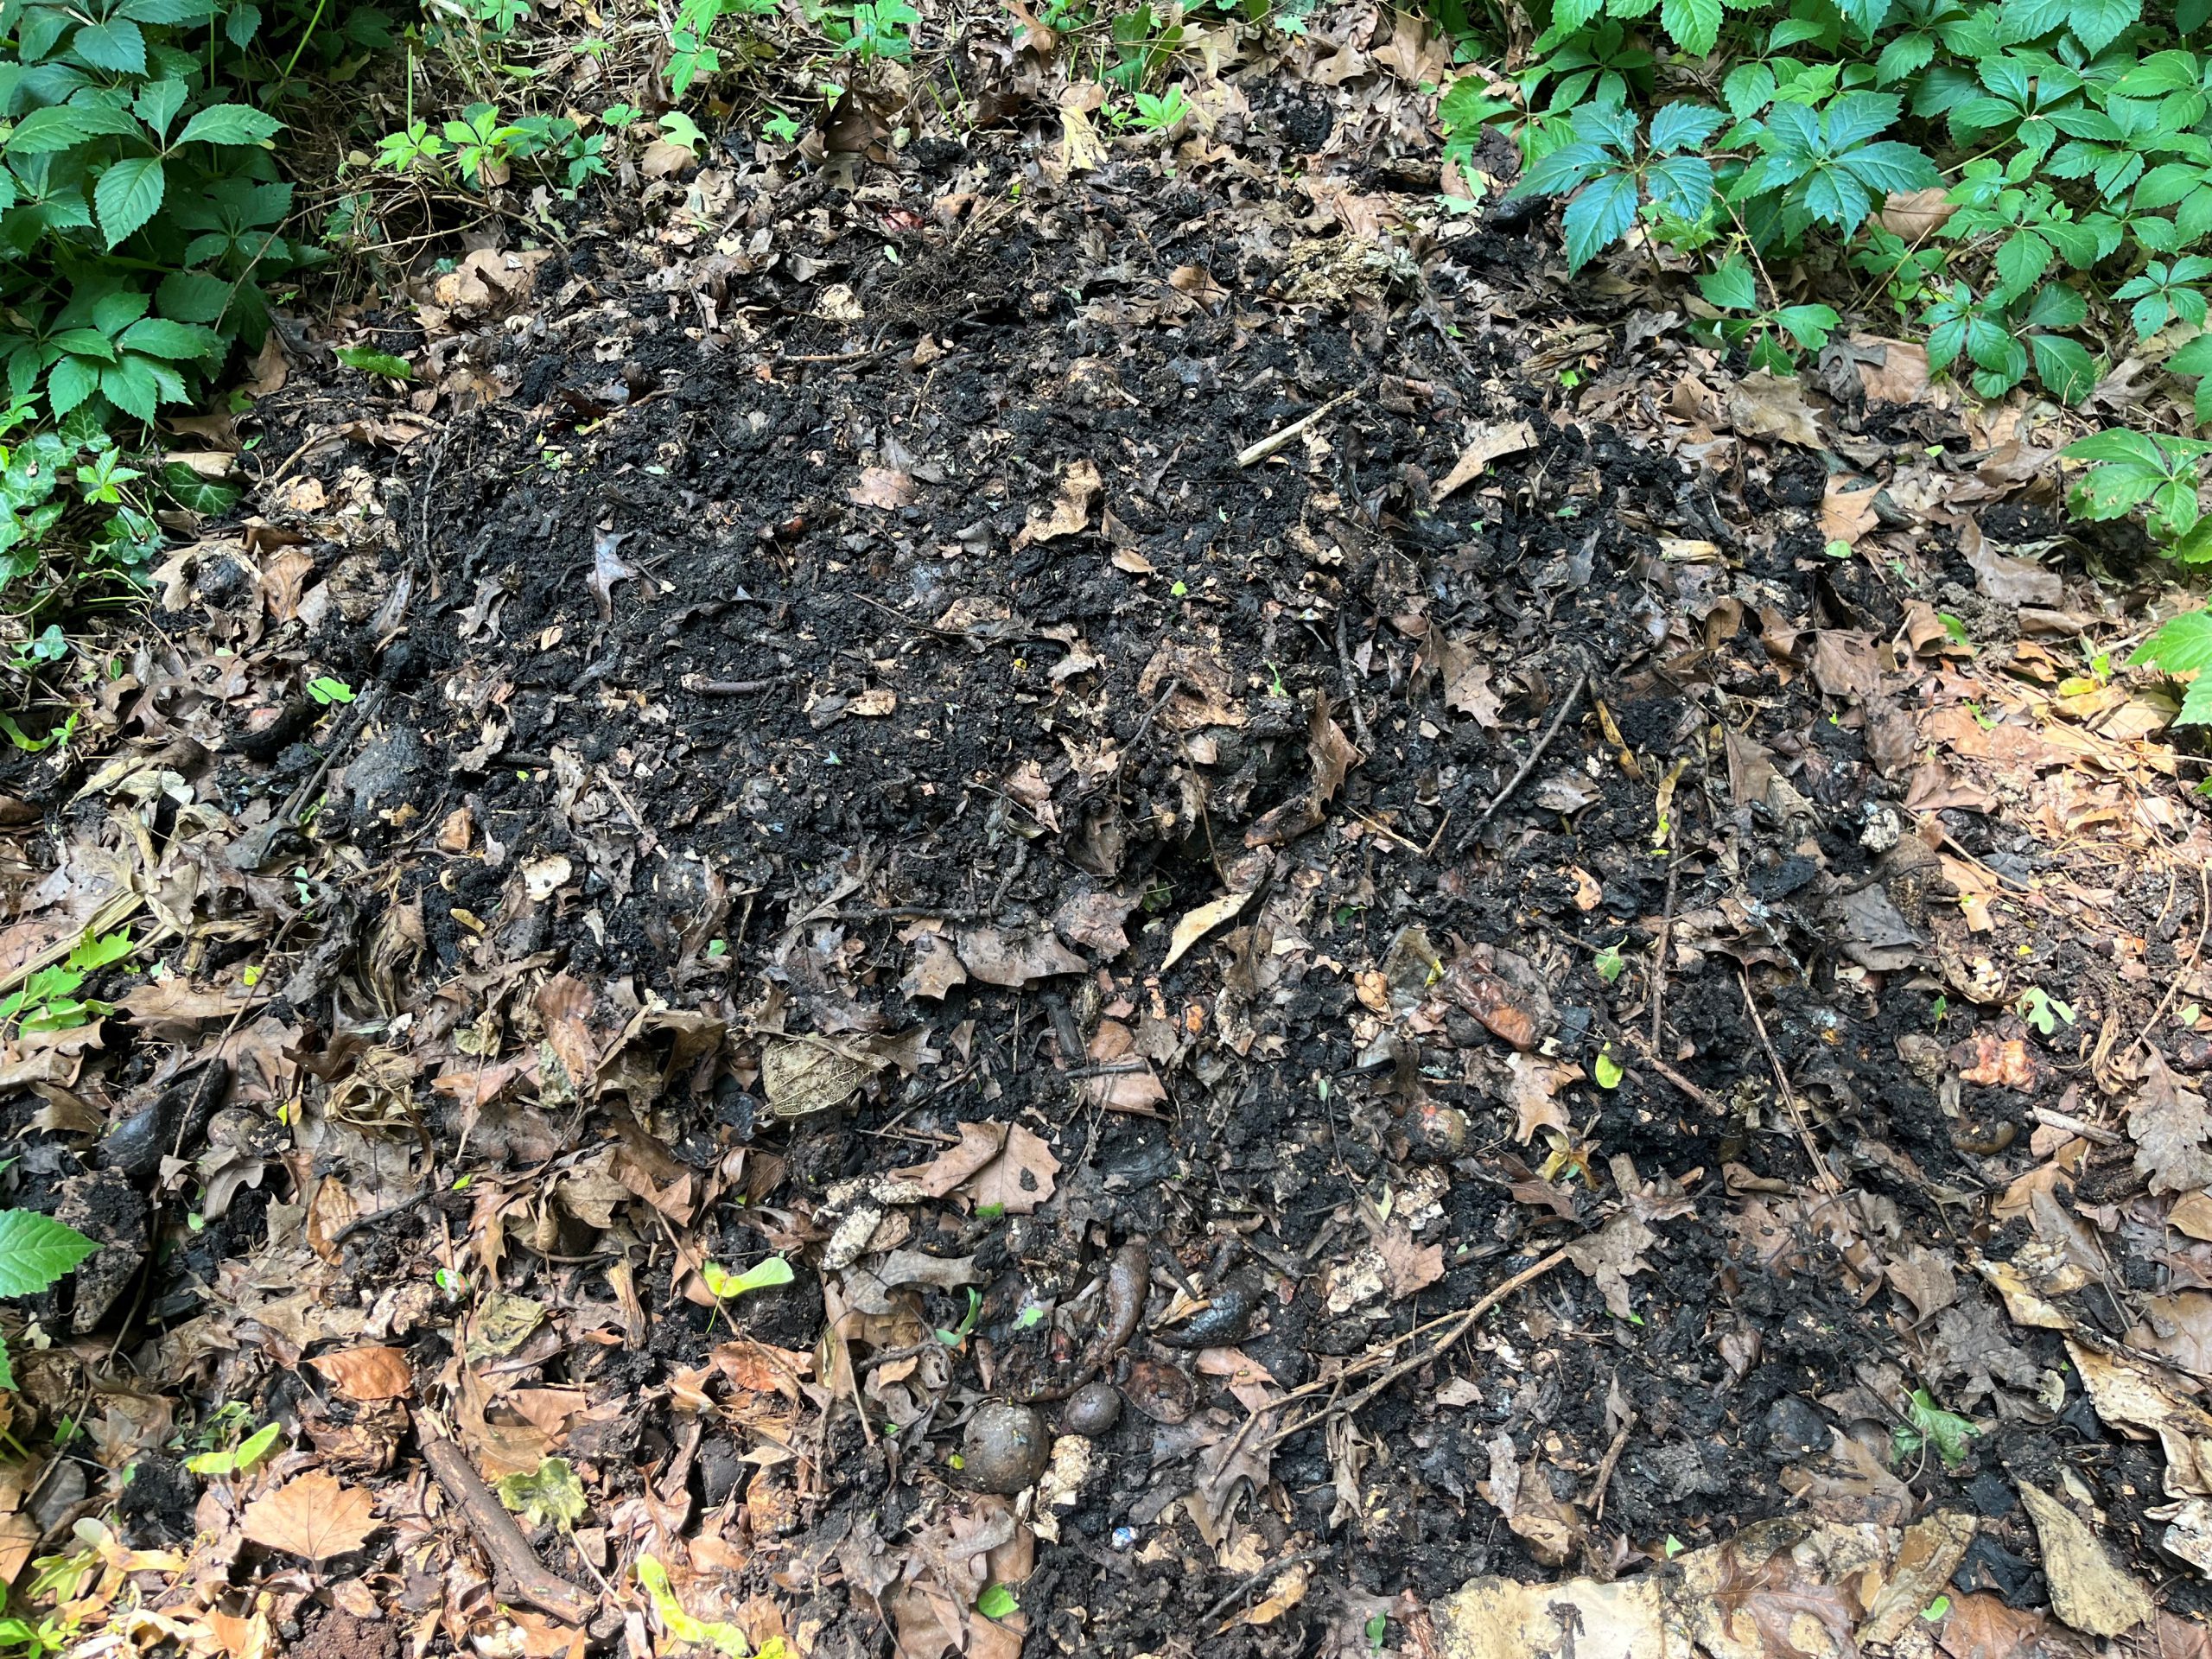 A pile of compost with green leaves around the edge of the pile